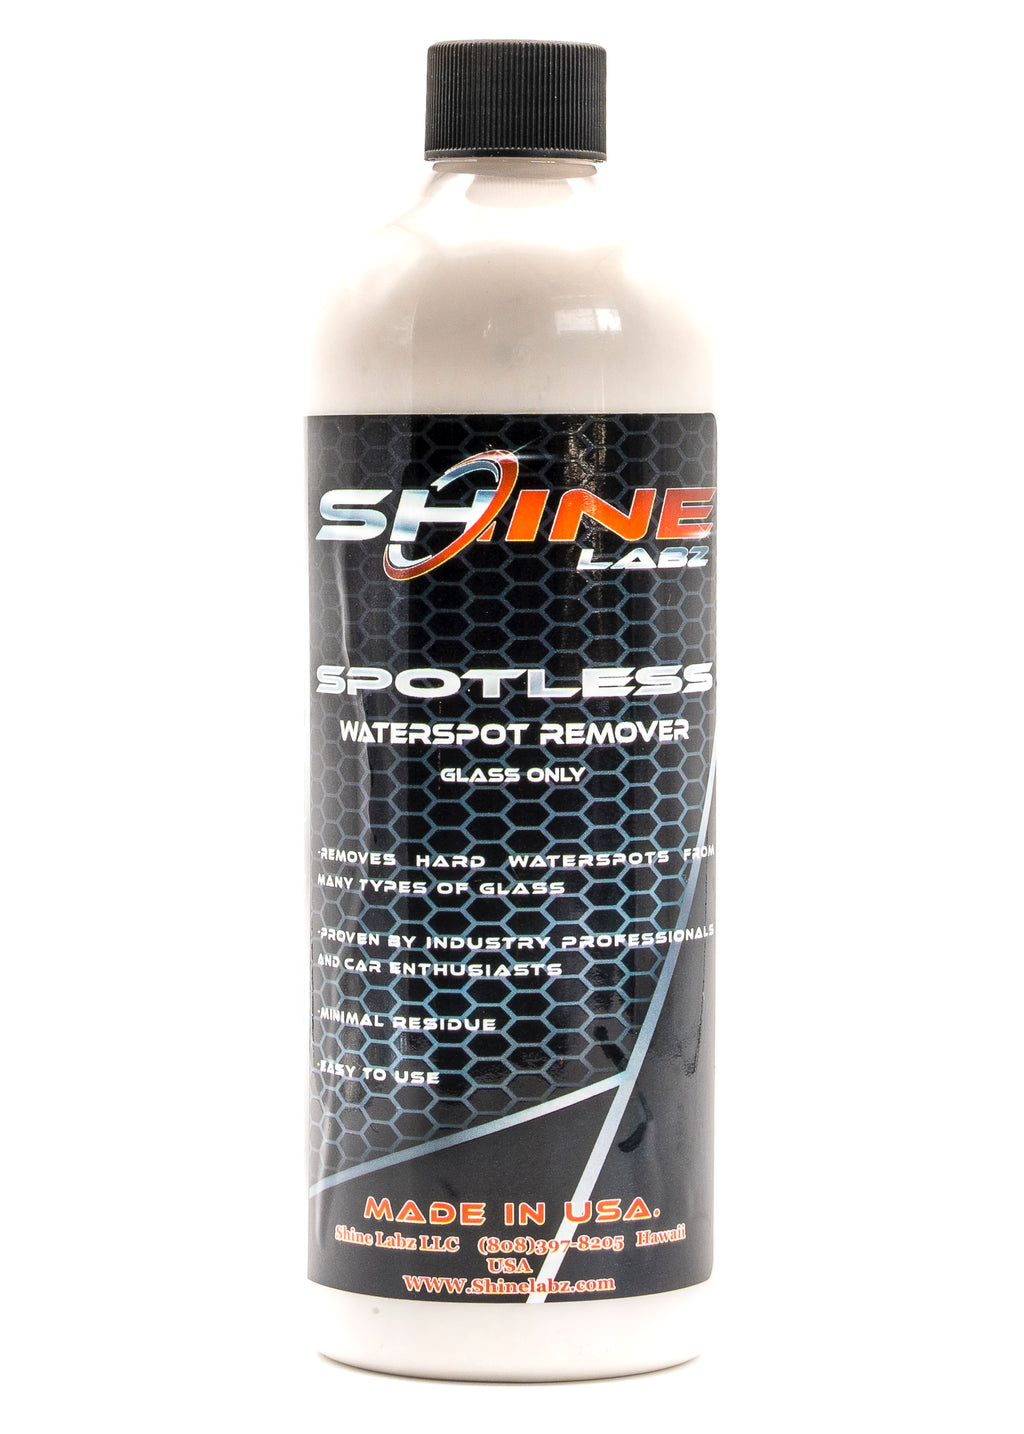 Spotless - Water Spot Remover *Glass Only*